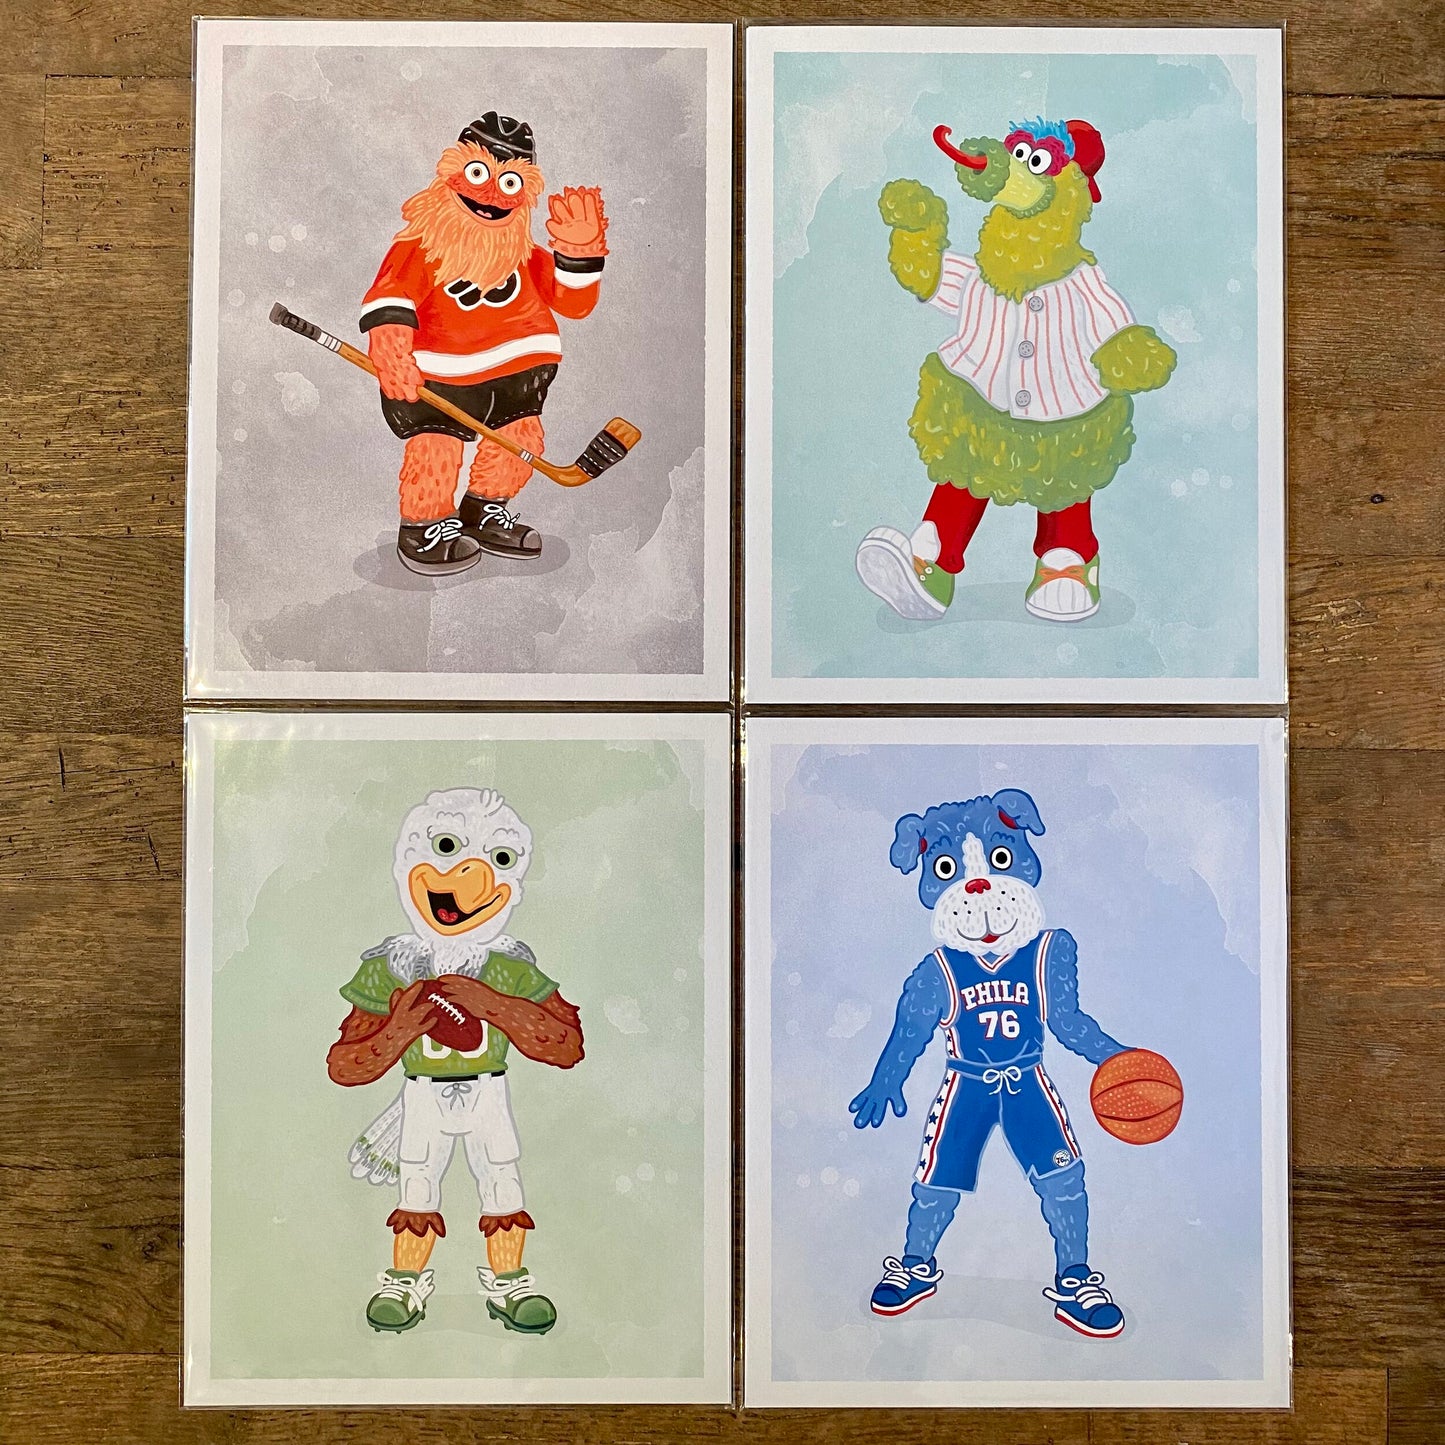 Four illustrations of anthropomorphic animal characters dressed in various sports uniforms representing different teams, transformed into Philly Mascot Prints by Jamie Bendas.